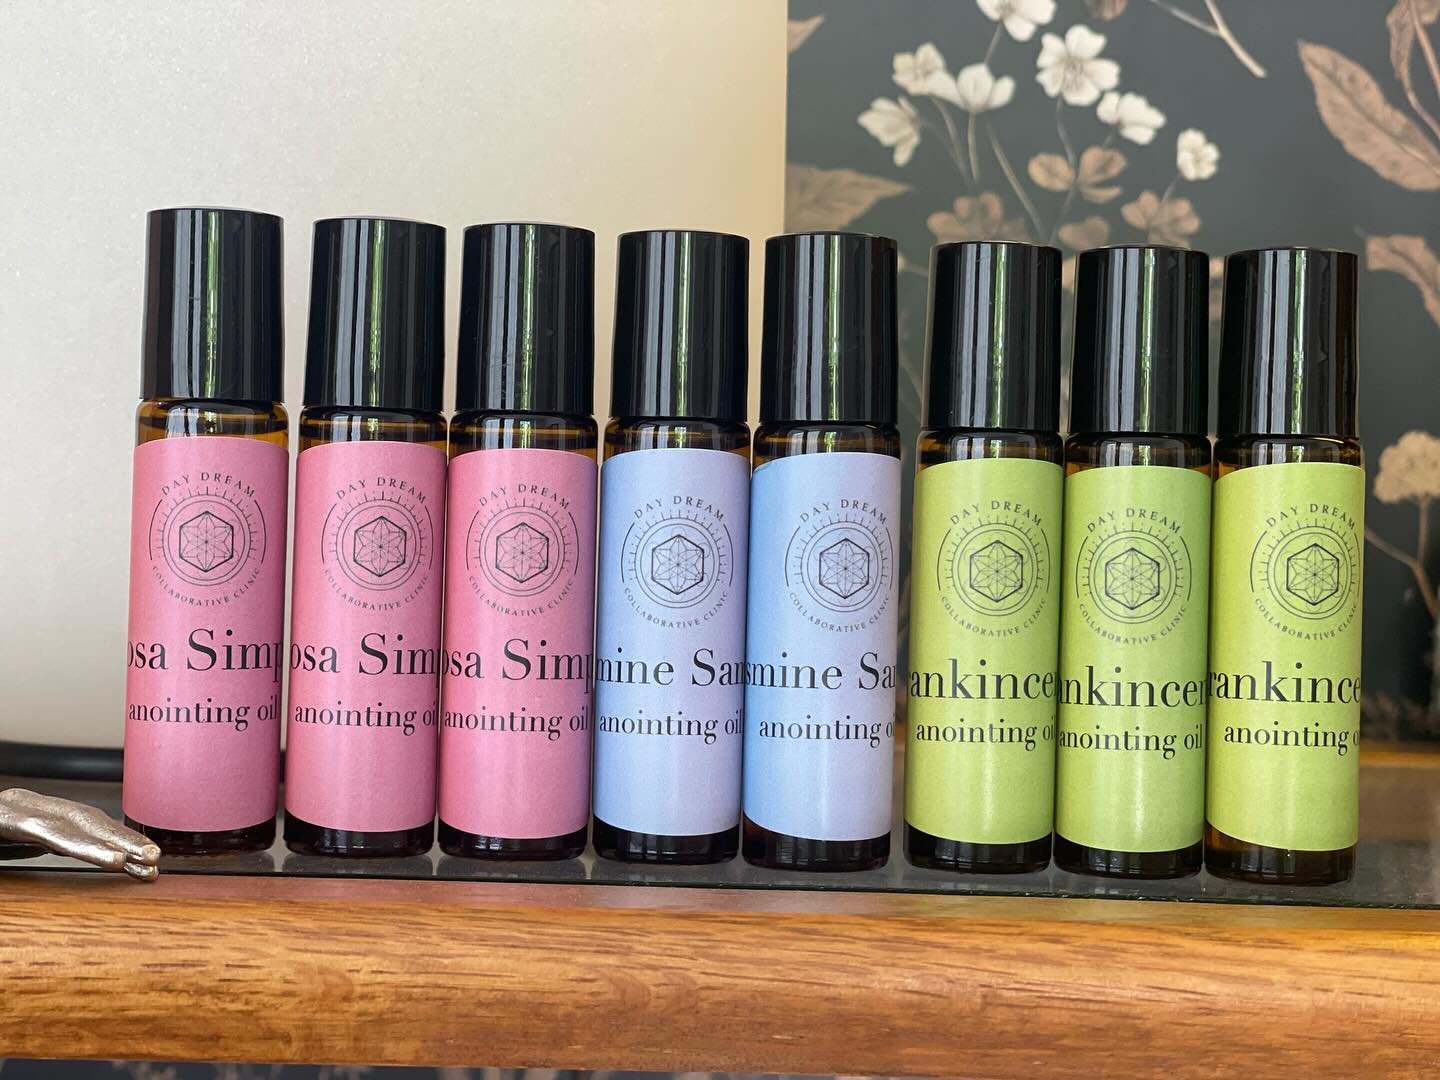 Essential oil rollers back in stock: we have jasmine, frankincense, and rose ✨

Also freshly available: 5 Element Aromatherapy Virtual Consults 

These 30 minute phone sessions begin with an intake to refine your intention, and a chat about your favo